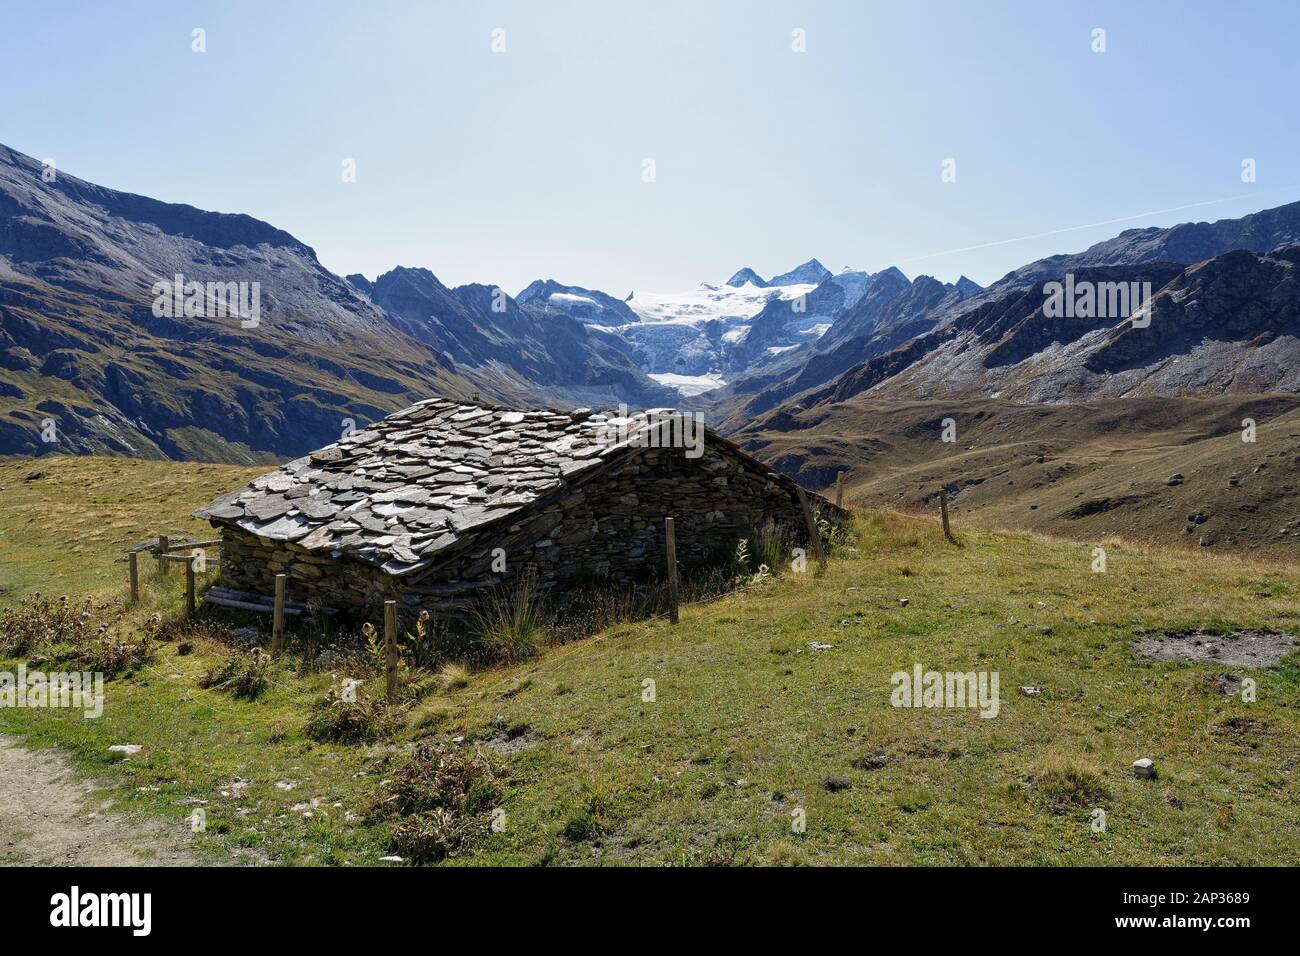 Small stone hut  on the Alpage de Torrent with a view of the Lac de Moiry and the Glacier de Moiry, Val de Moiry, Val d'Anniviers, Valais, Switzerland Stock Photo